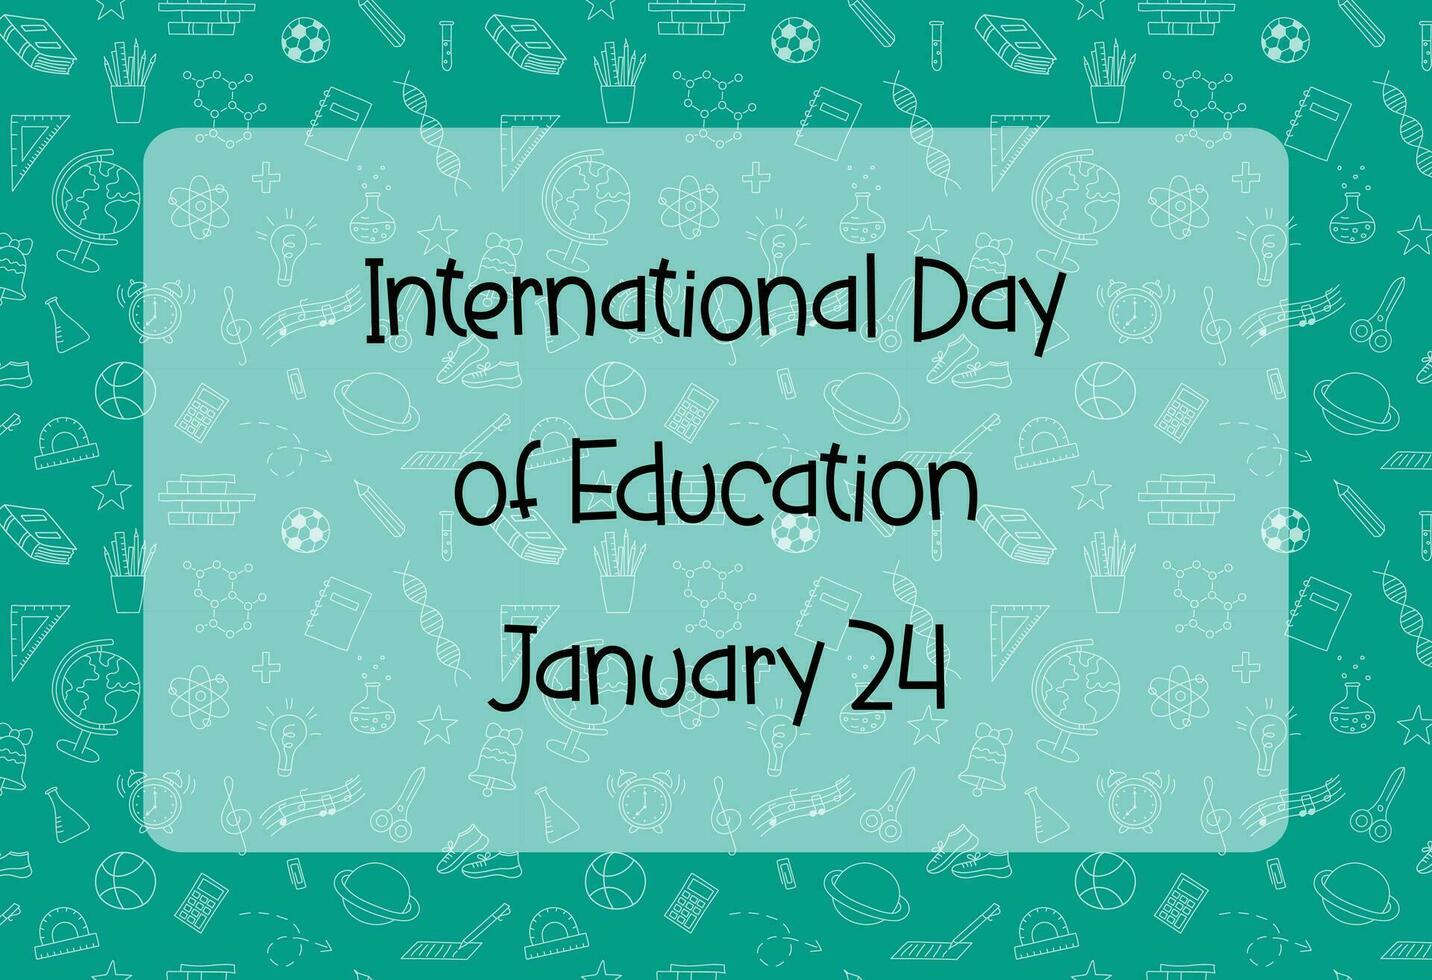 International Day of Education January 24. Celebration banner with cute school doodle elements. World educational holiday. Vector illustration